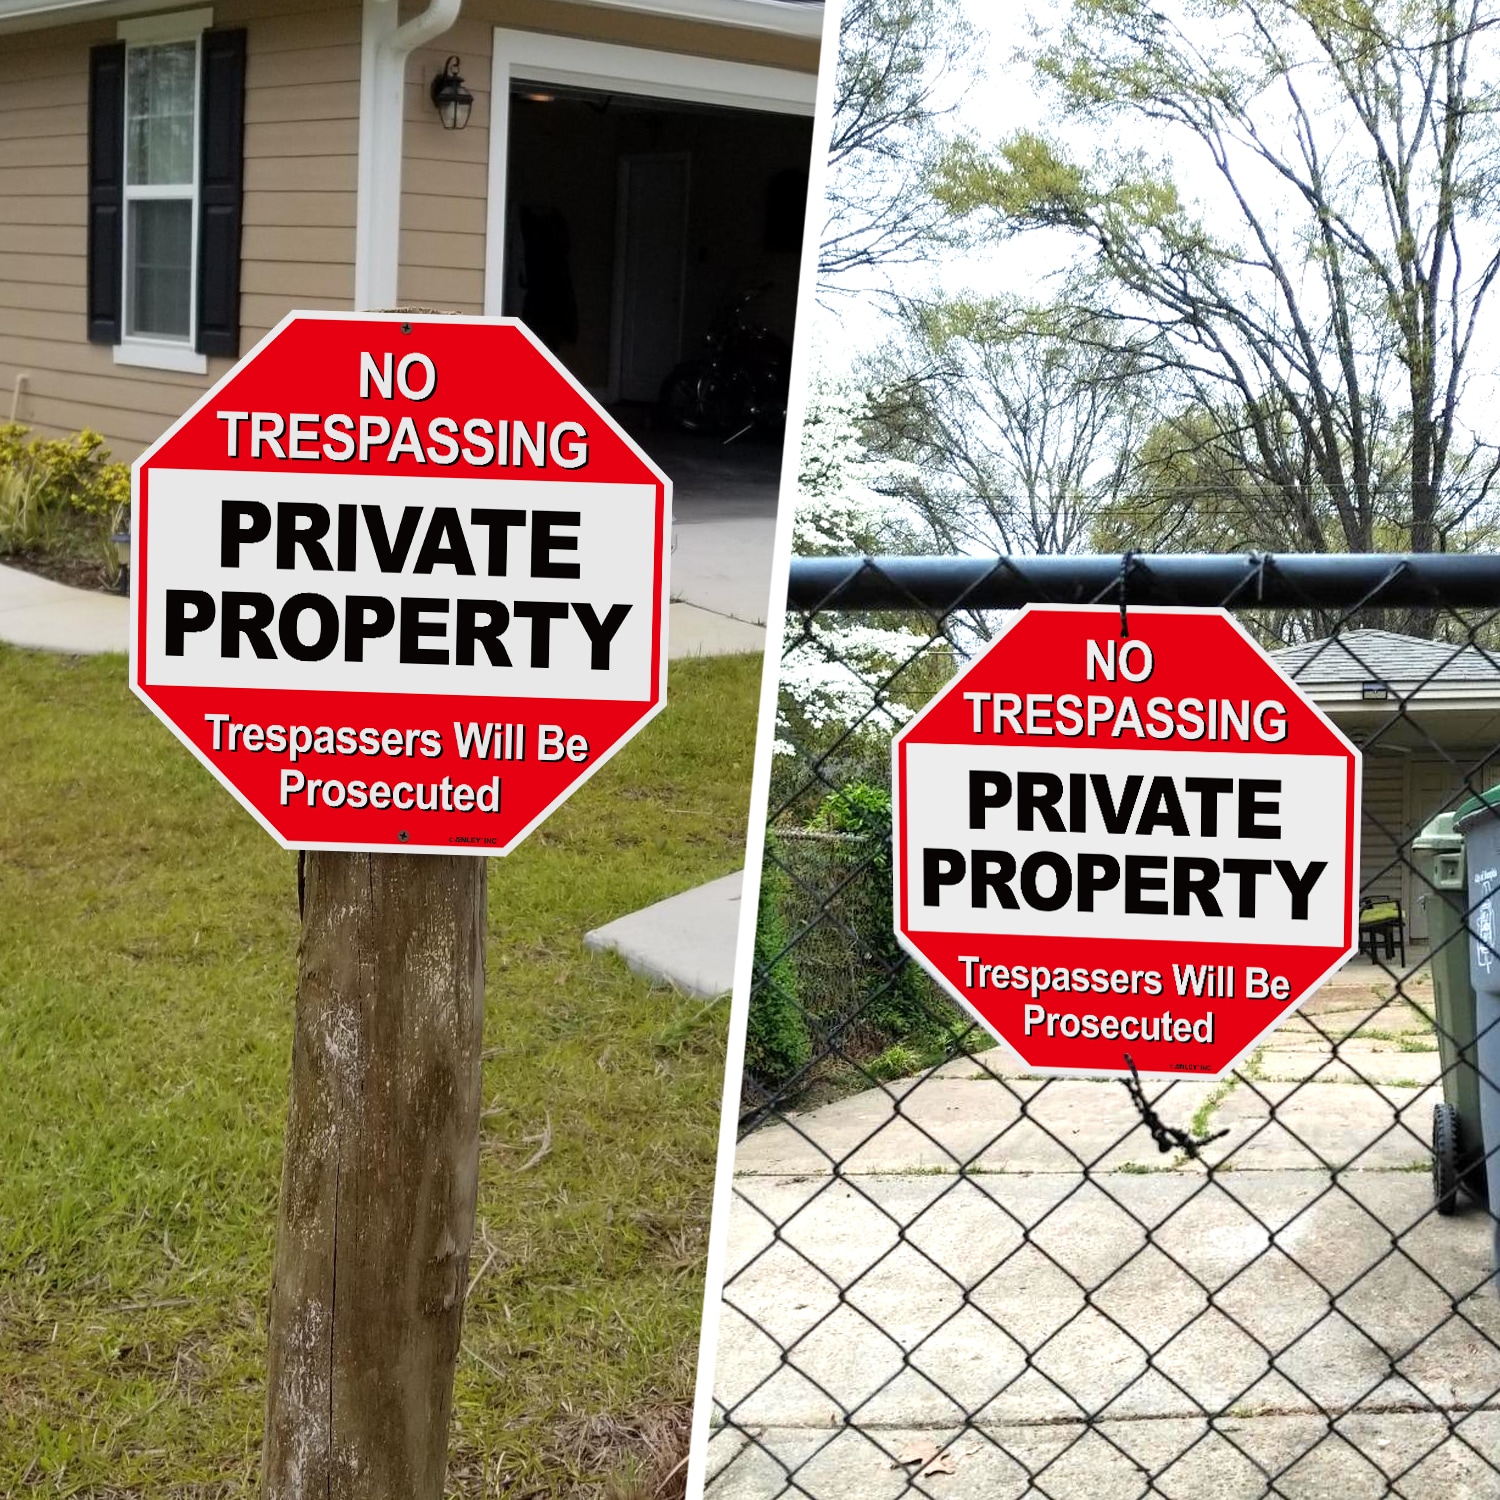 9 x 12 Aluminum Warning Security NO TRESPASSING Private Property Sign 